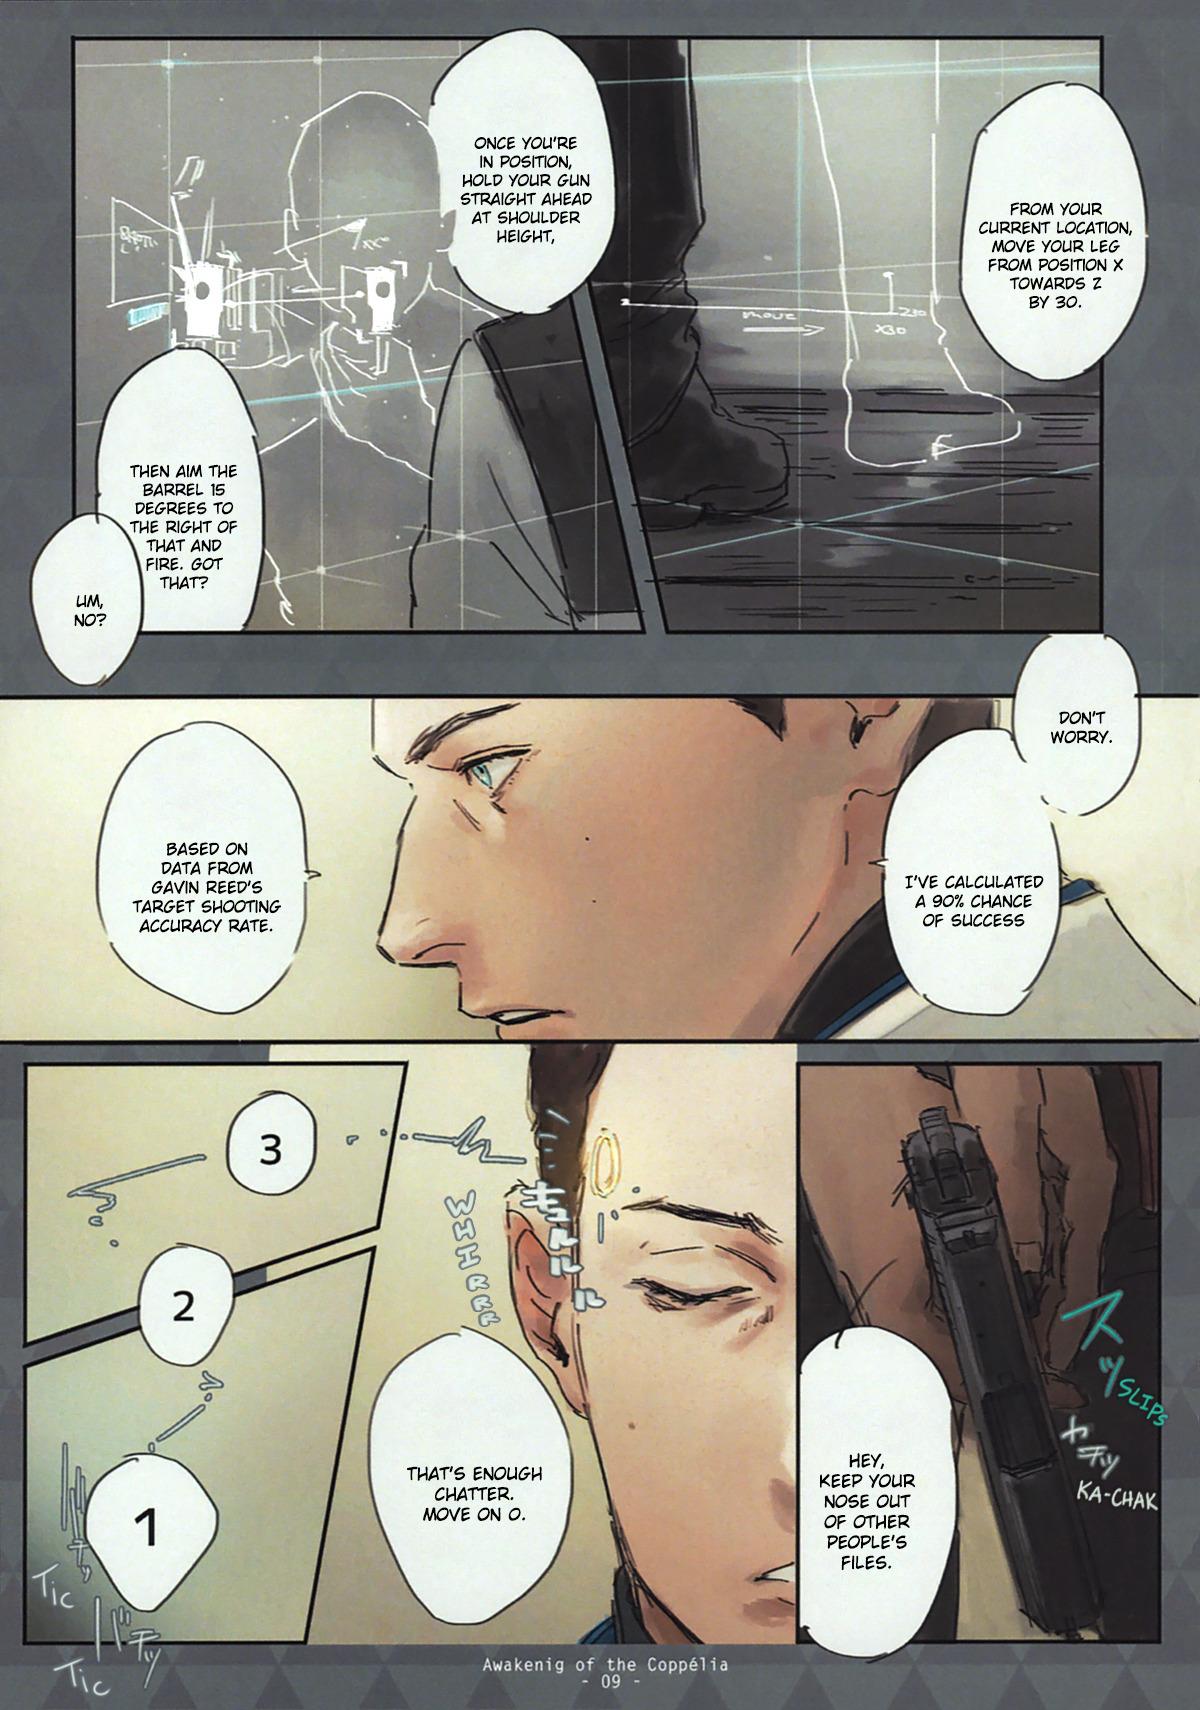 Blow Job Contest Awakening of Copper - Detroit become human Shower - Page 5